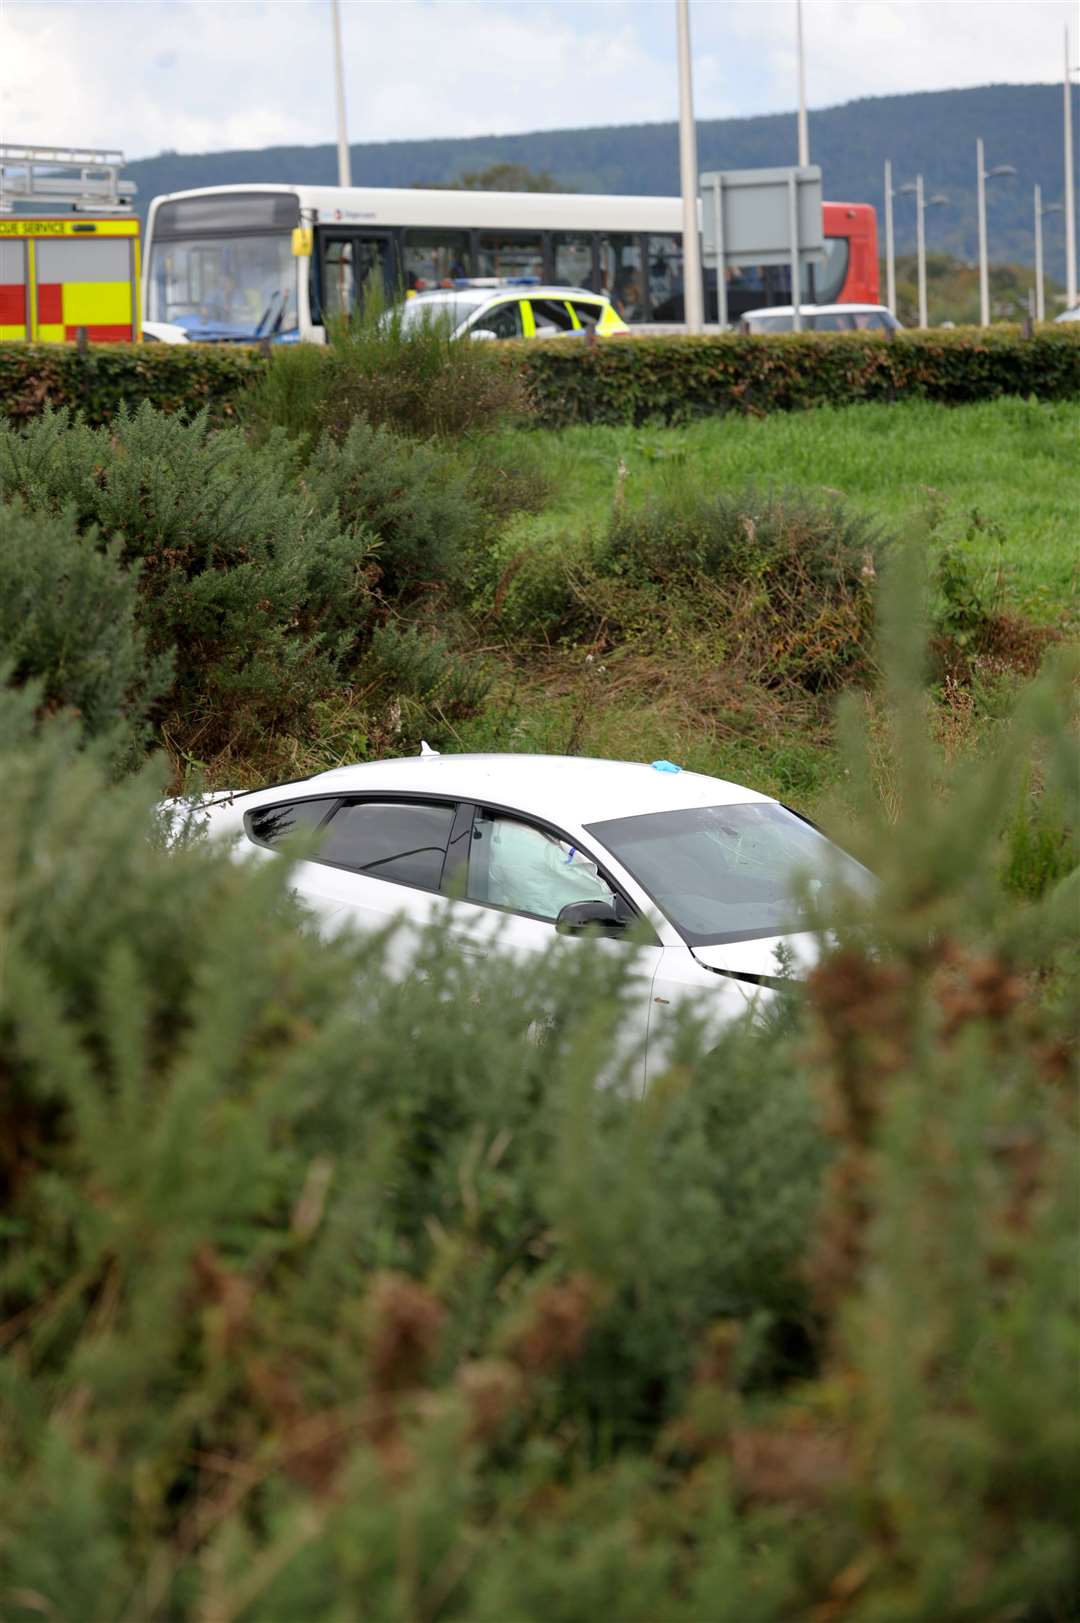 The car went off the road near Inverness Campus.